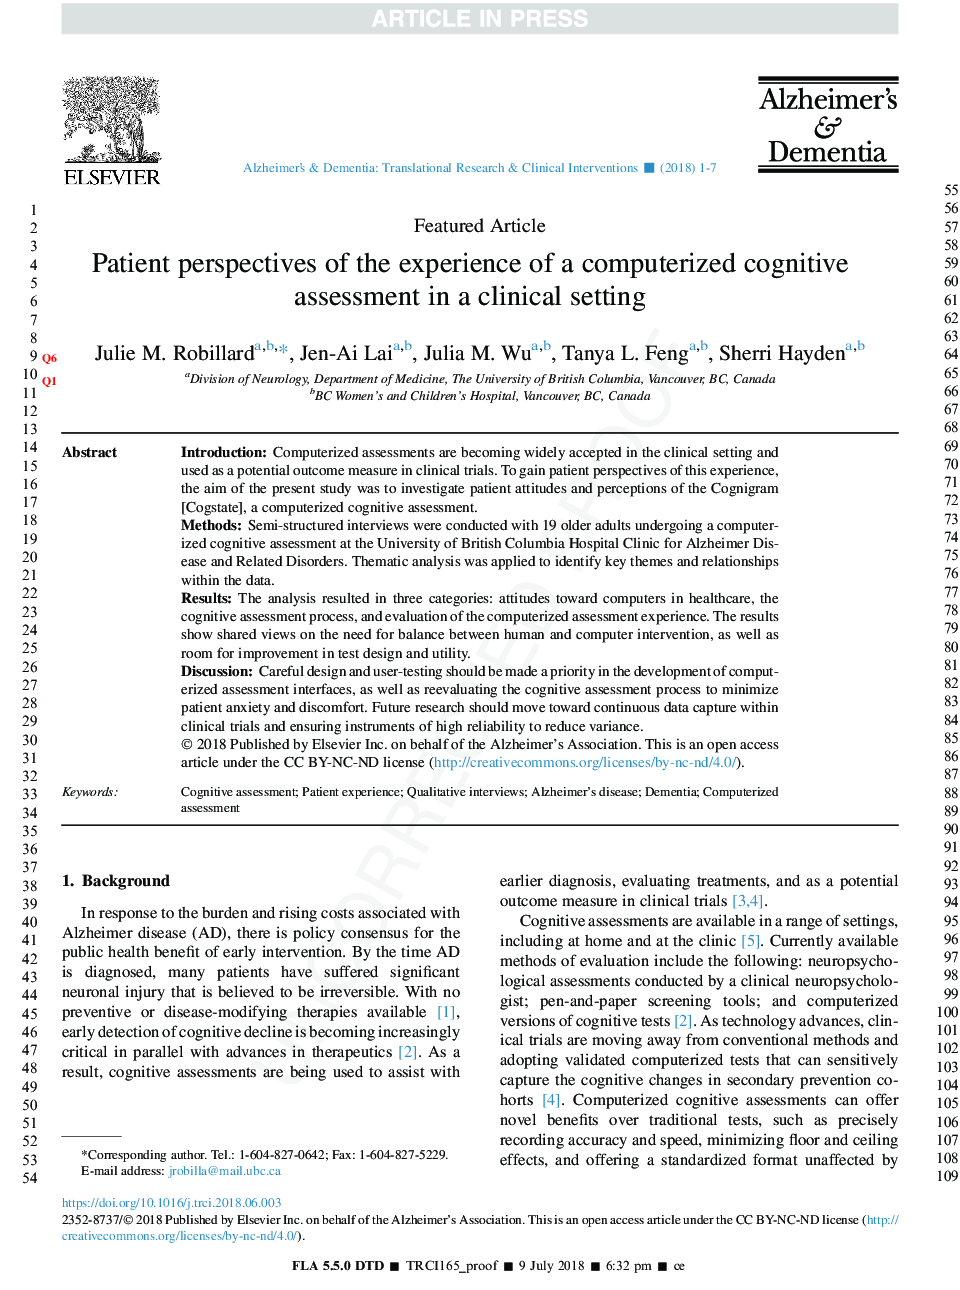 Patient perspectives of the experience of a computerized cognitive assessment in a clinical setting